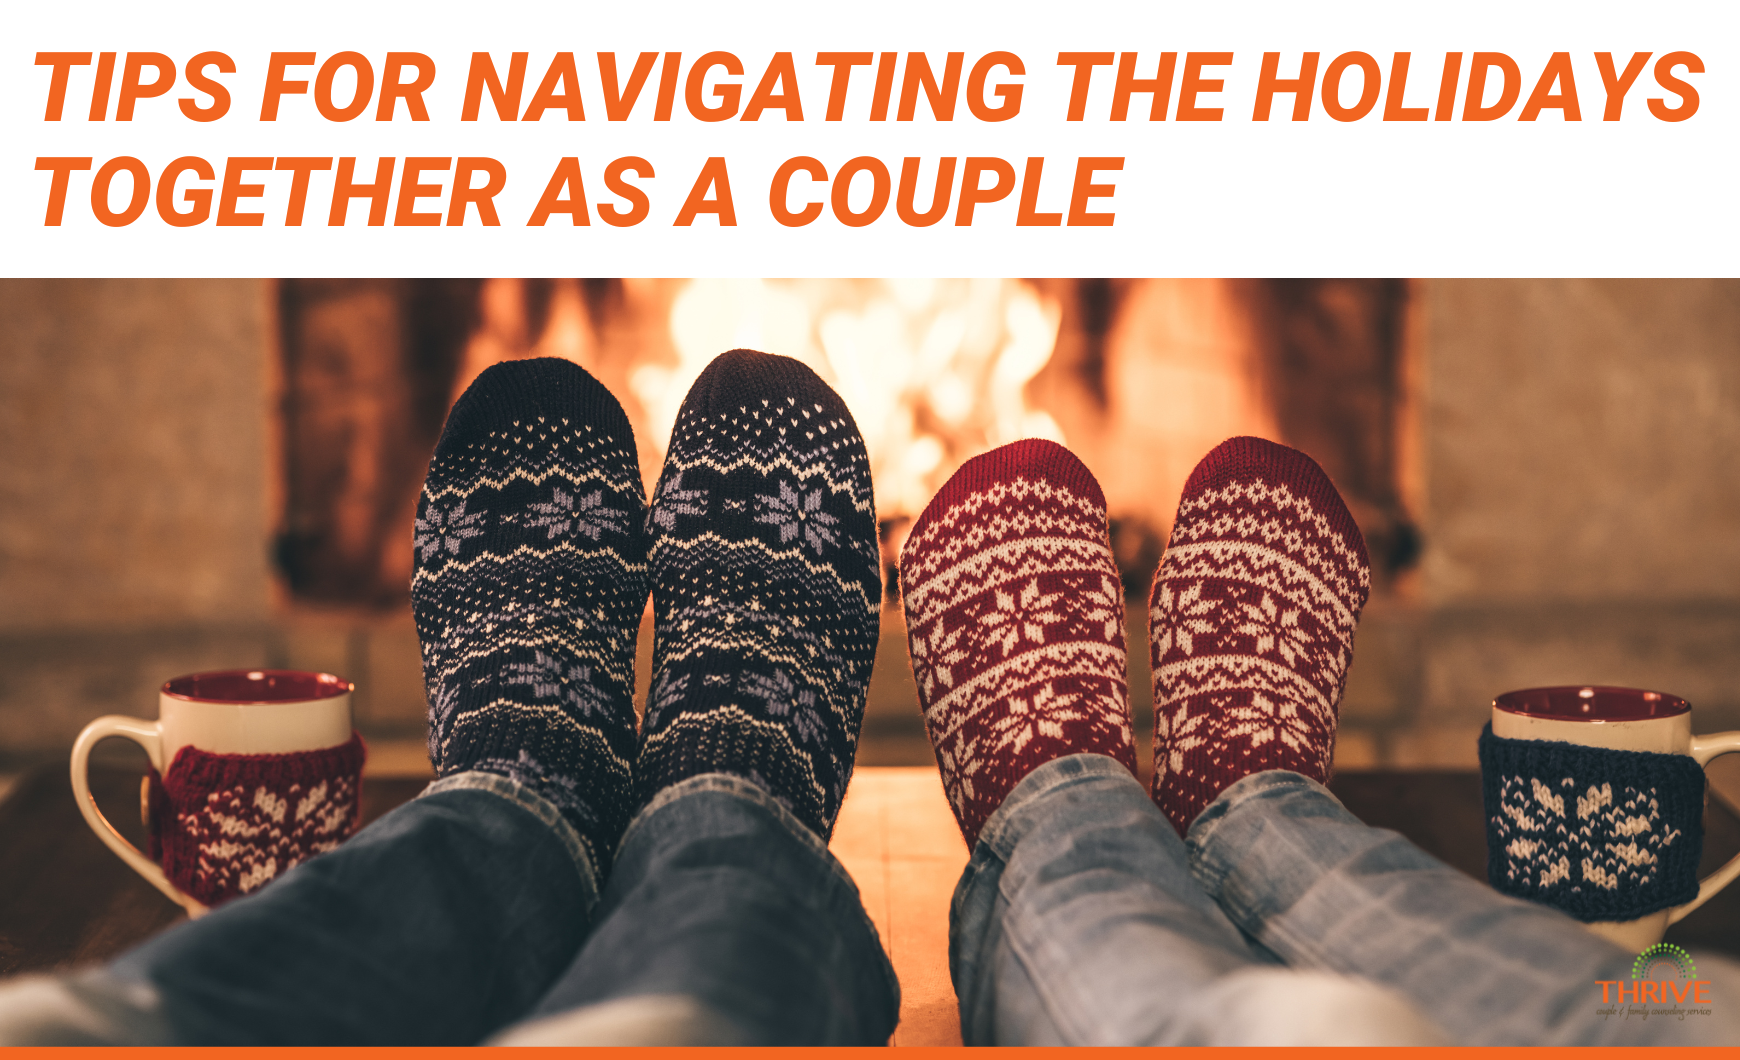 "Tips for Navigating the Holidays Together as a Couple" in dark orange font above a stock photo of two pairs of feet, in cozy socks, in front of a roaring fire. Next to each pair of feet is a mug with a knitted cozy.